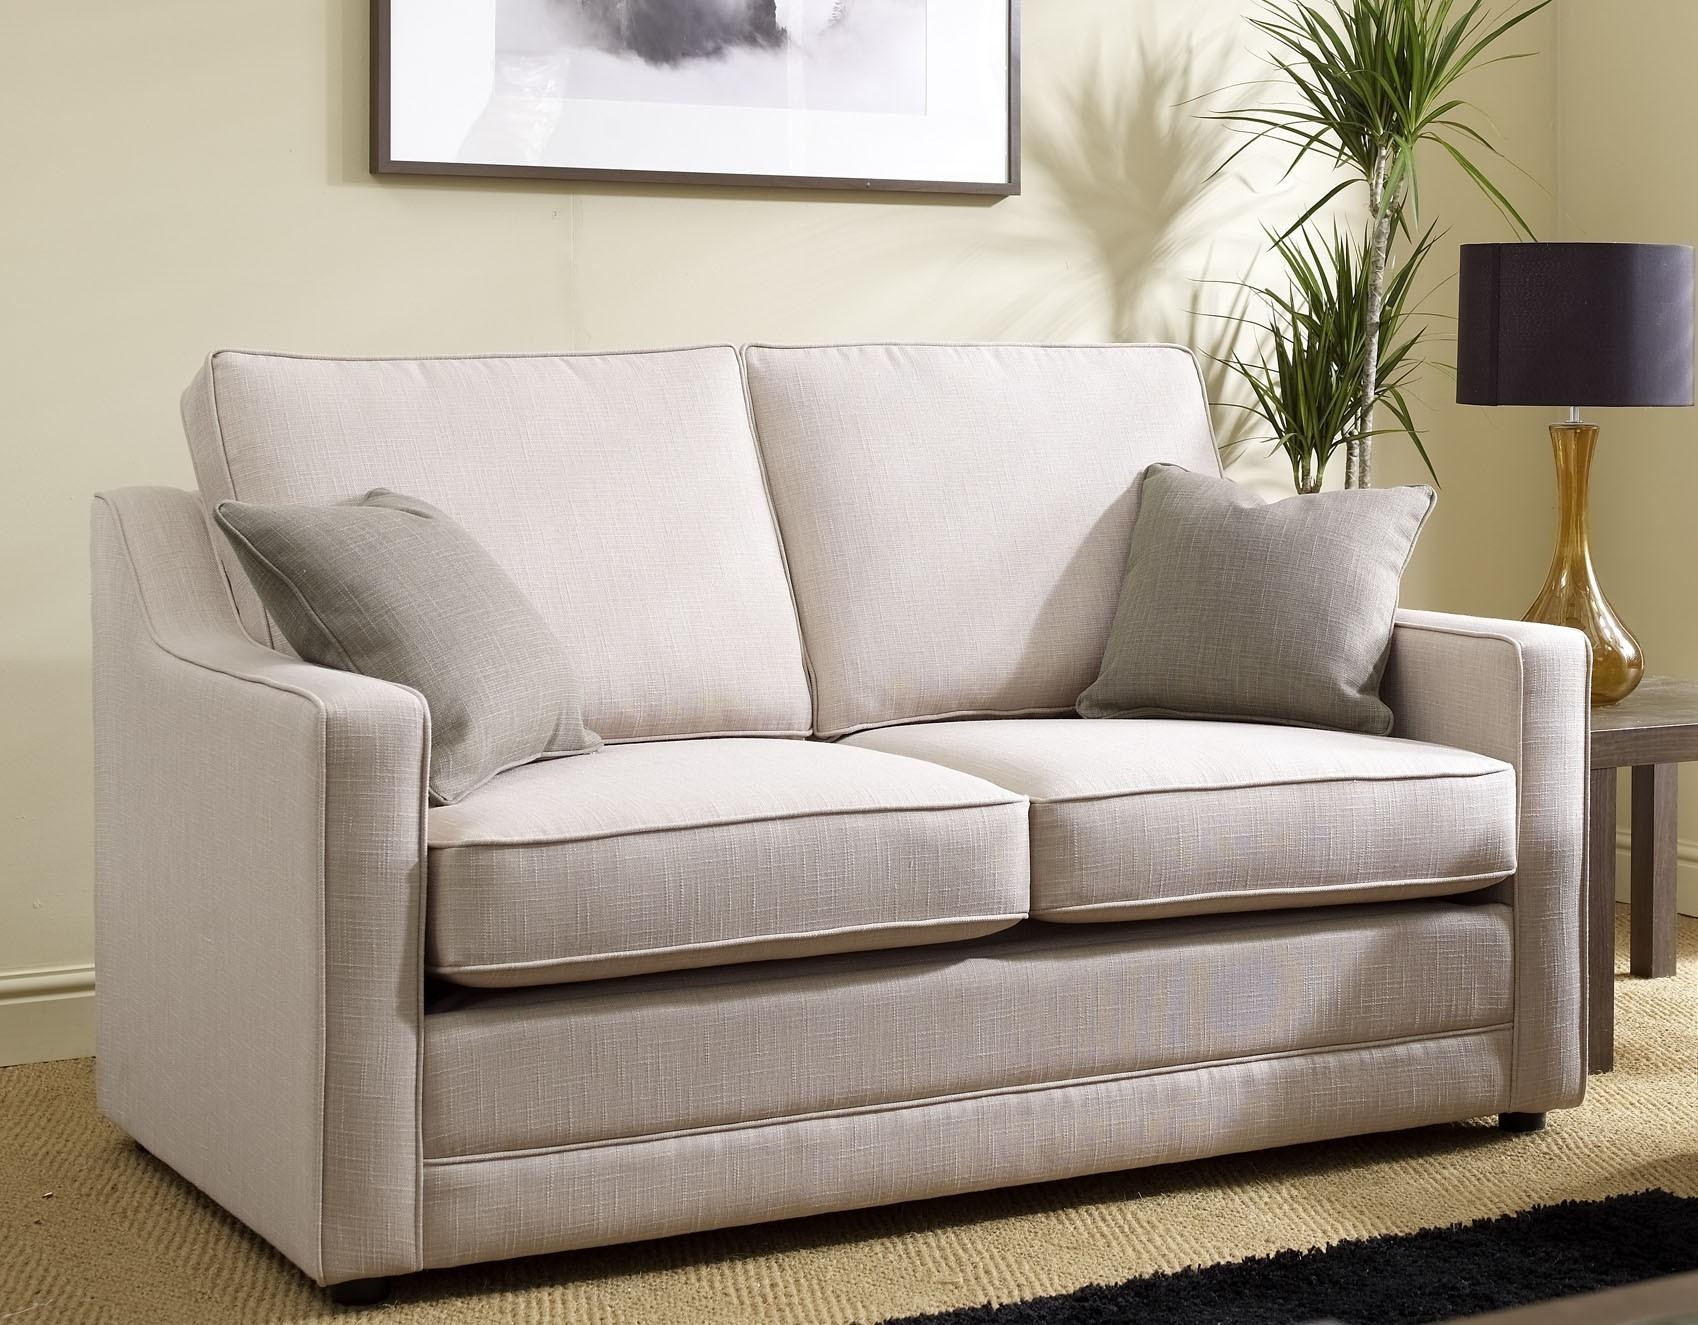 Small Bedroom Sofa
 20 Best Collection of Mini Sofa Sleepers